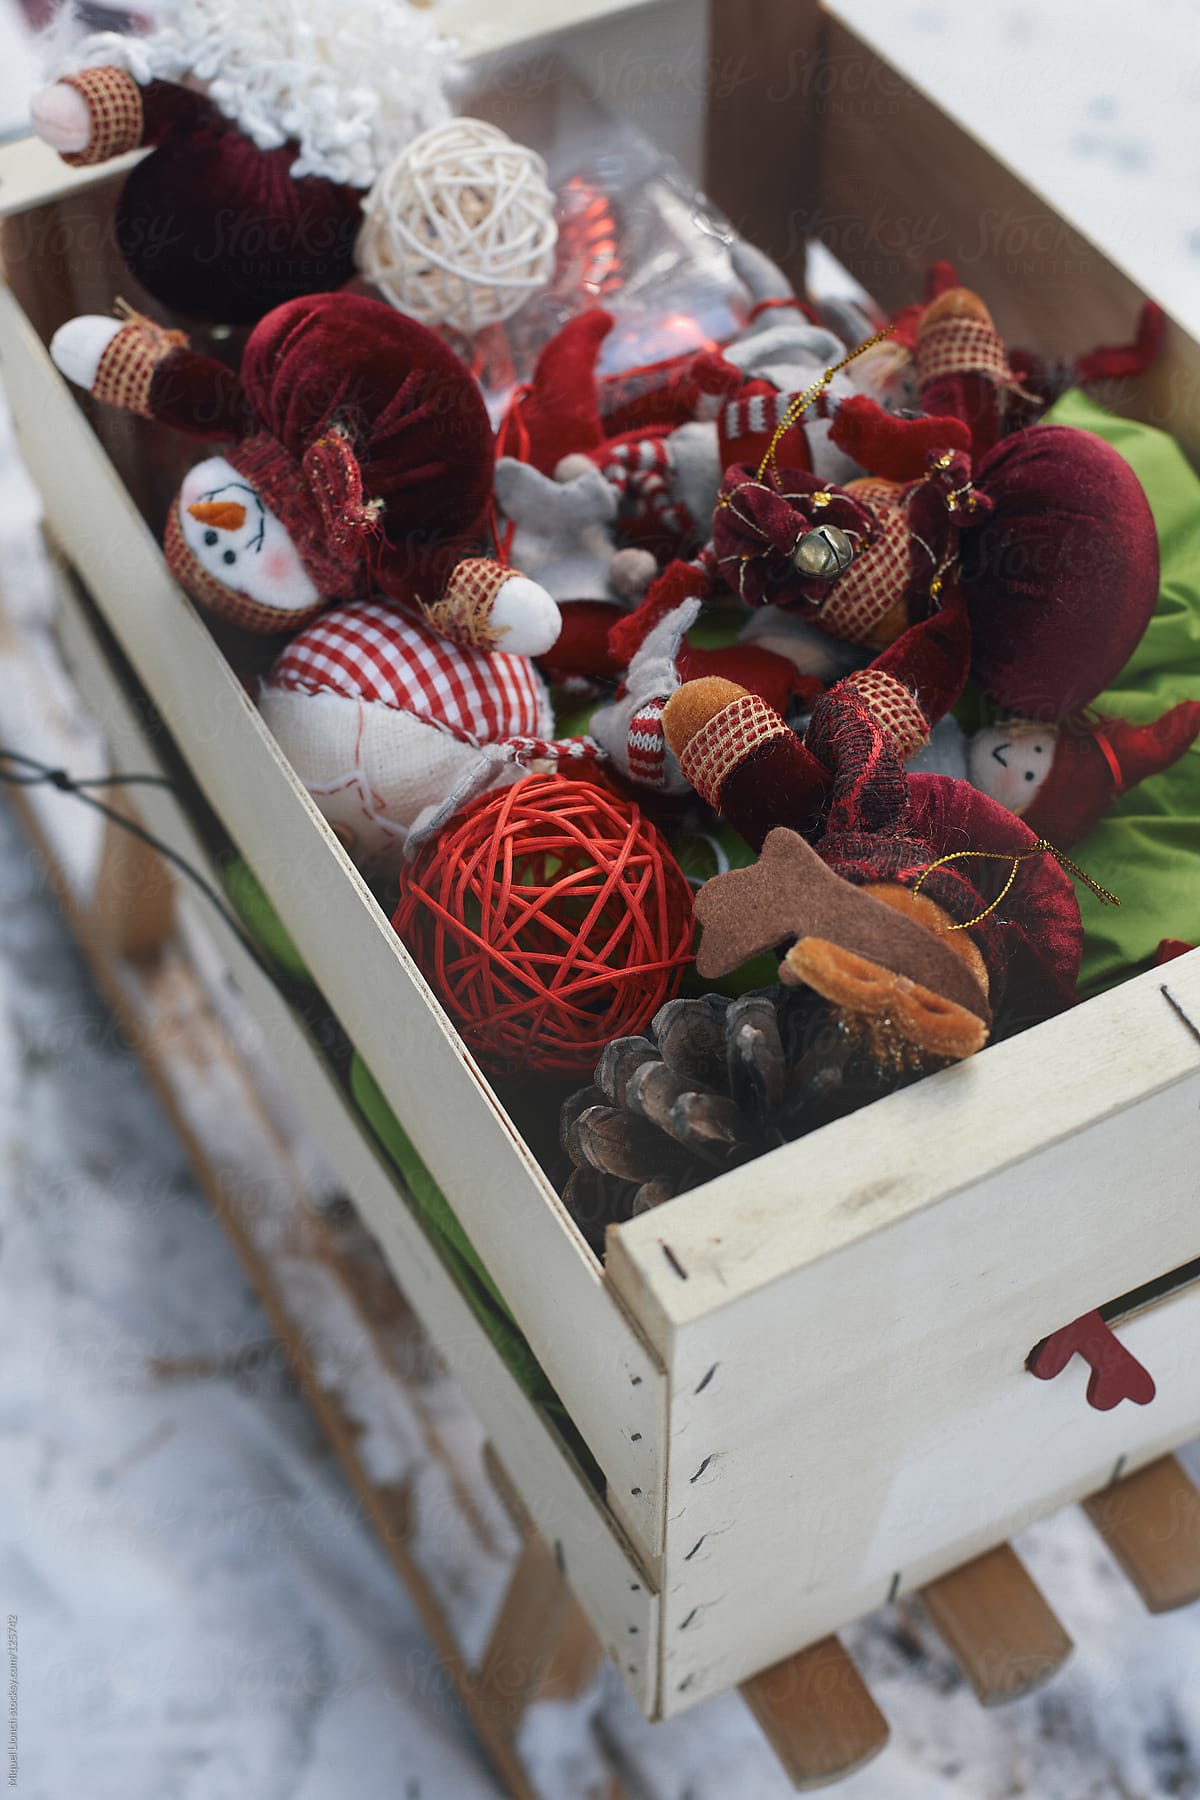 Sled loaded with christmas ornaments